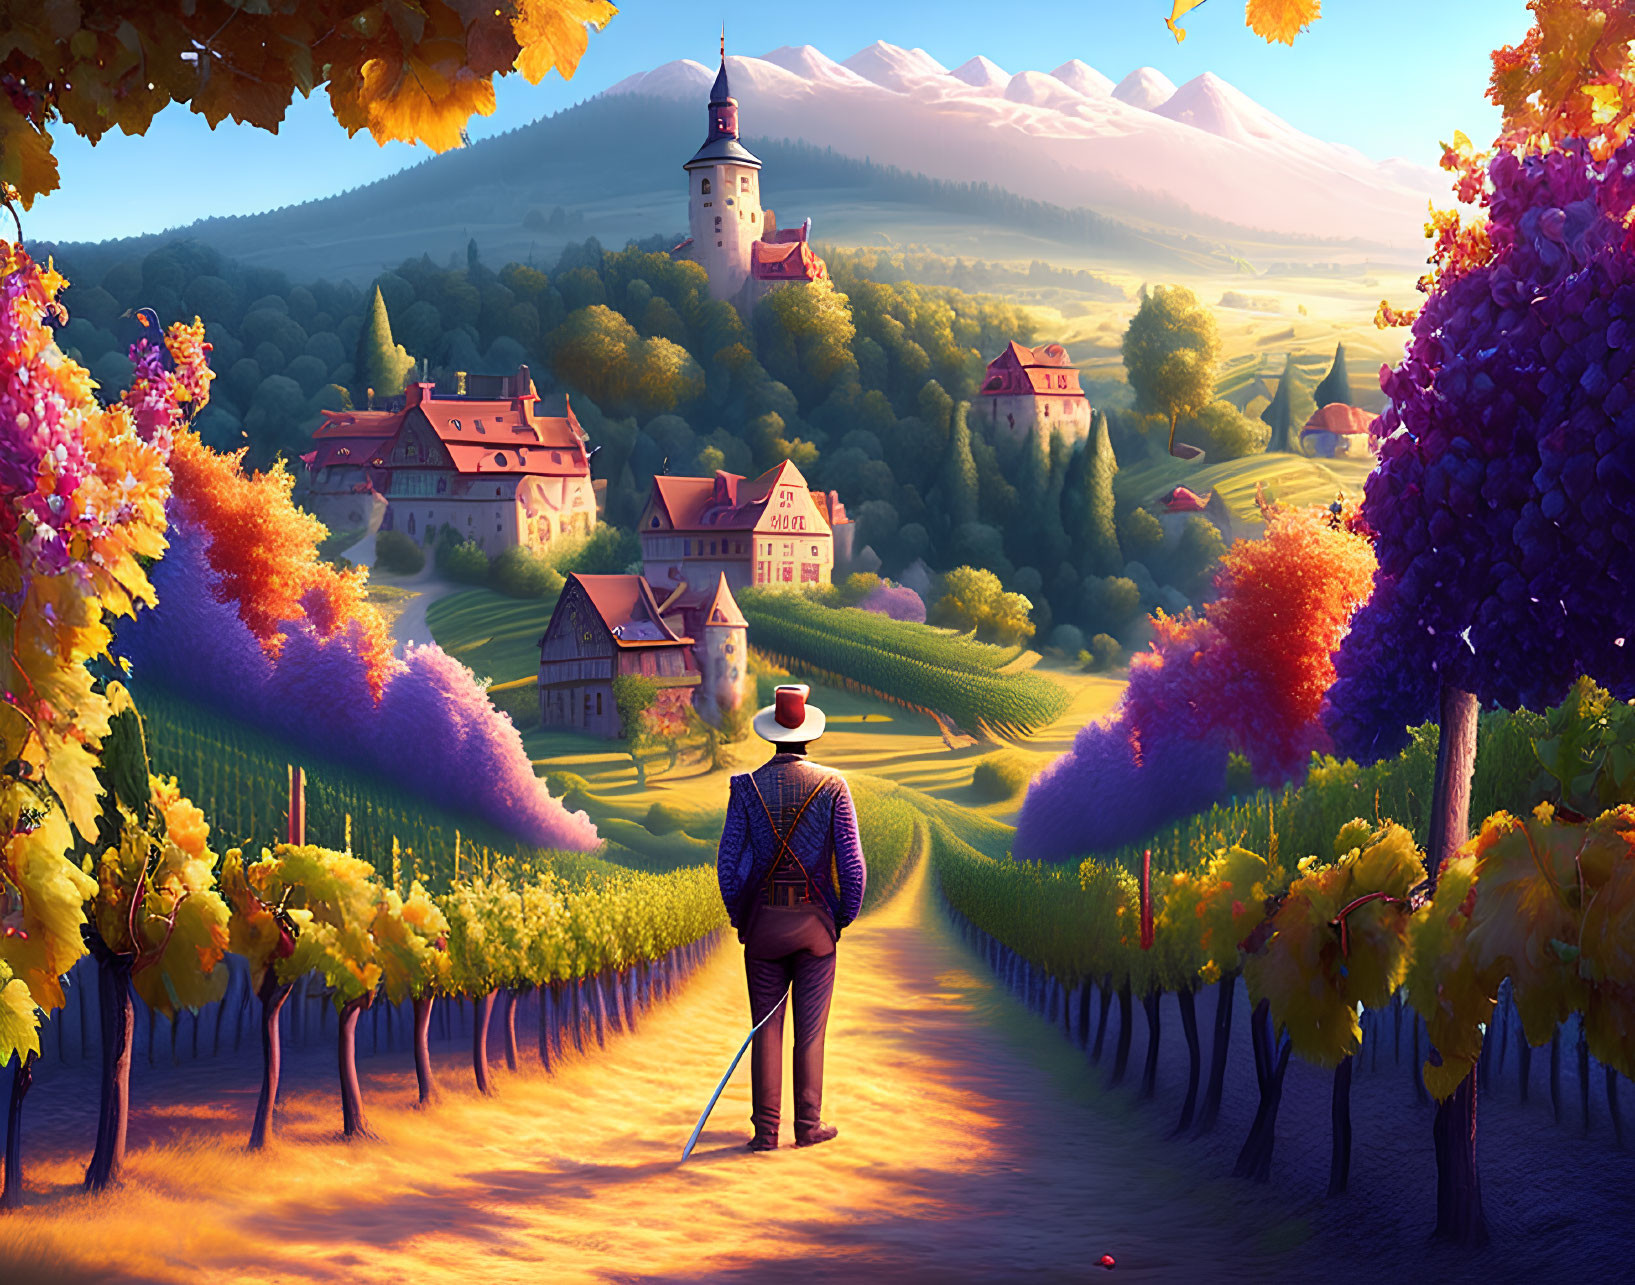 Farmer in vibrant vineyard with village, castles, and mountains.